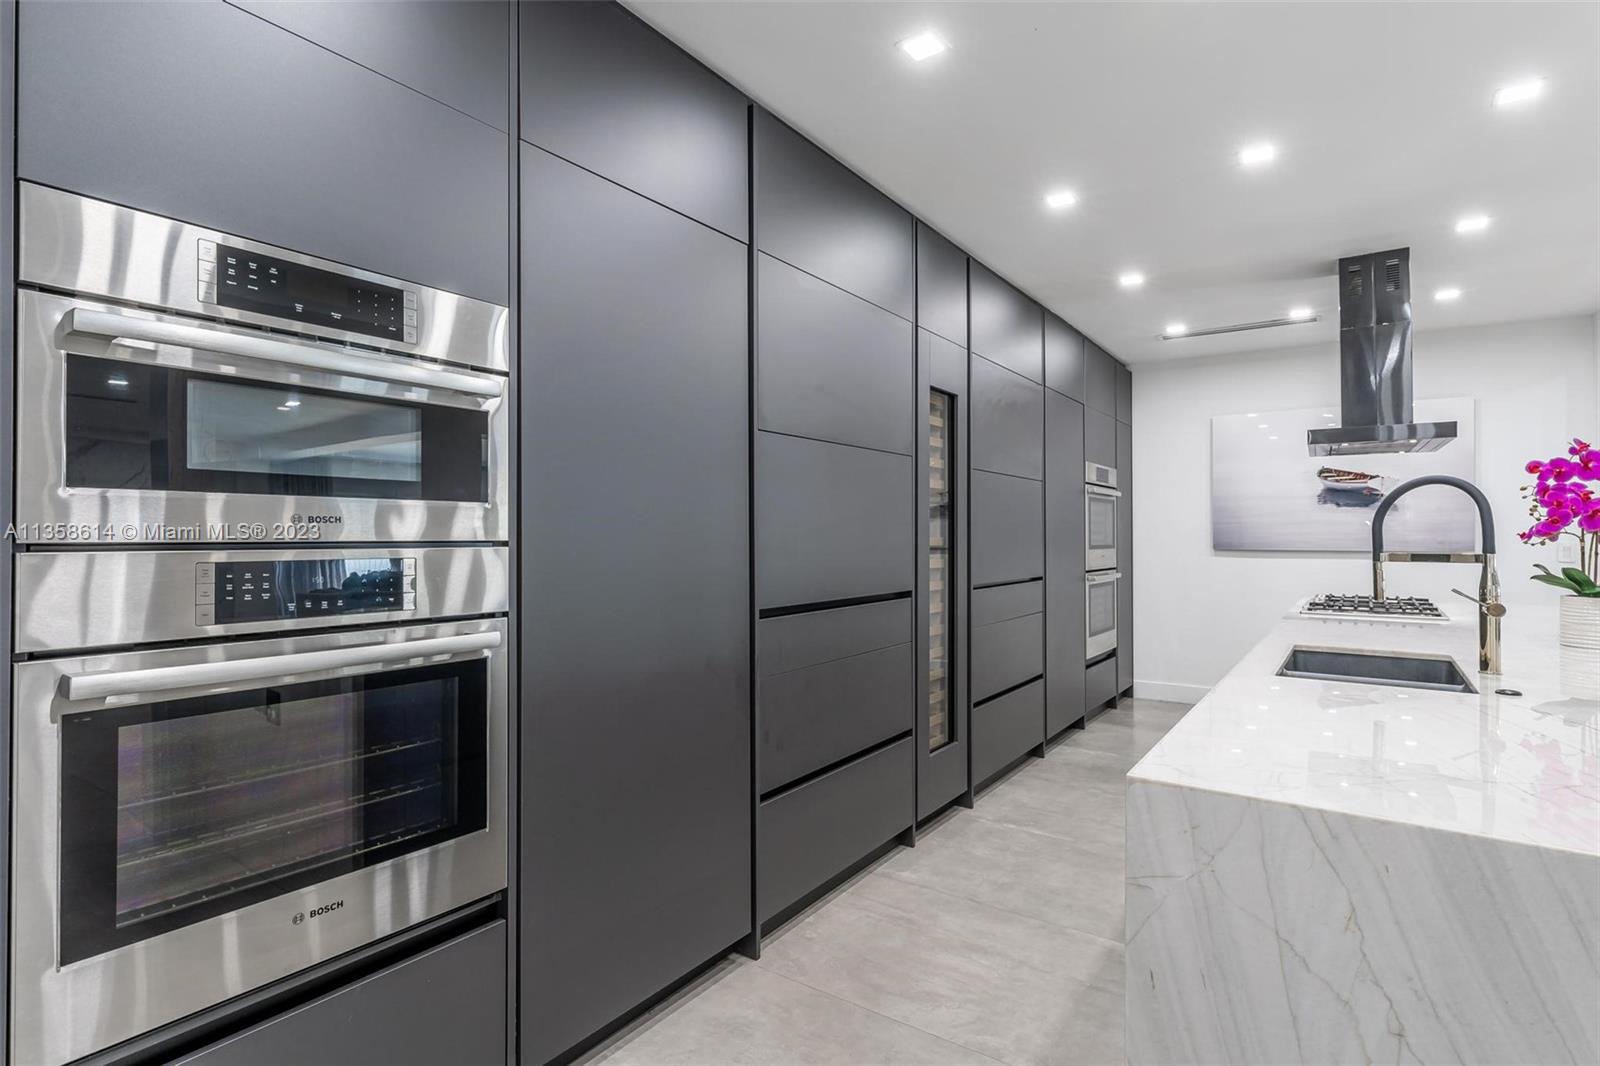 a kitchen with stainless steel appliances kitchen island granite countertop a stove a microwave and a refrigerator